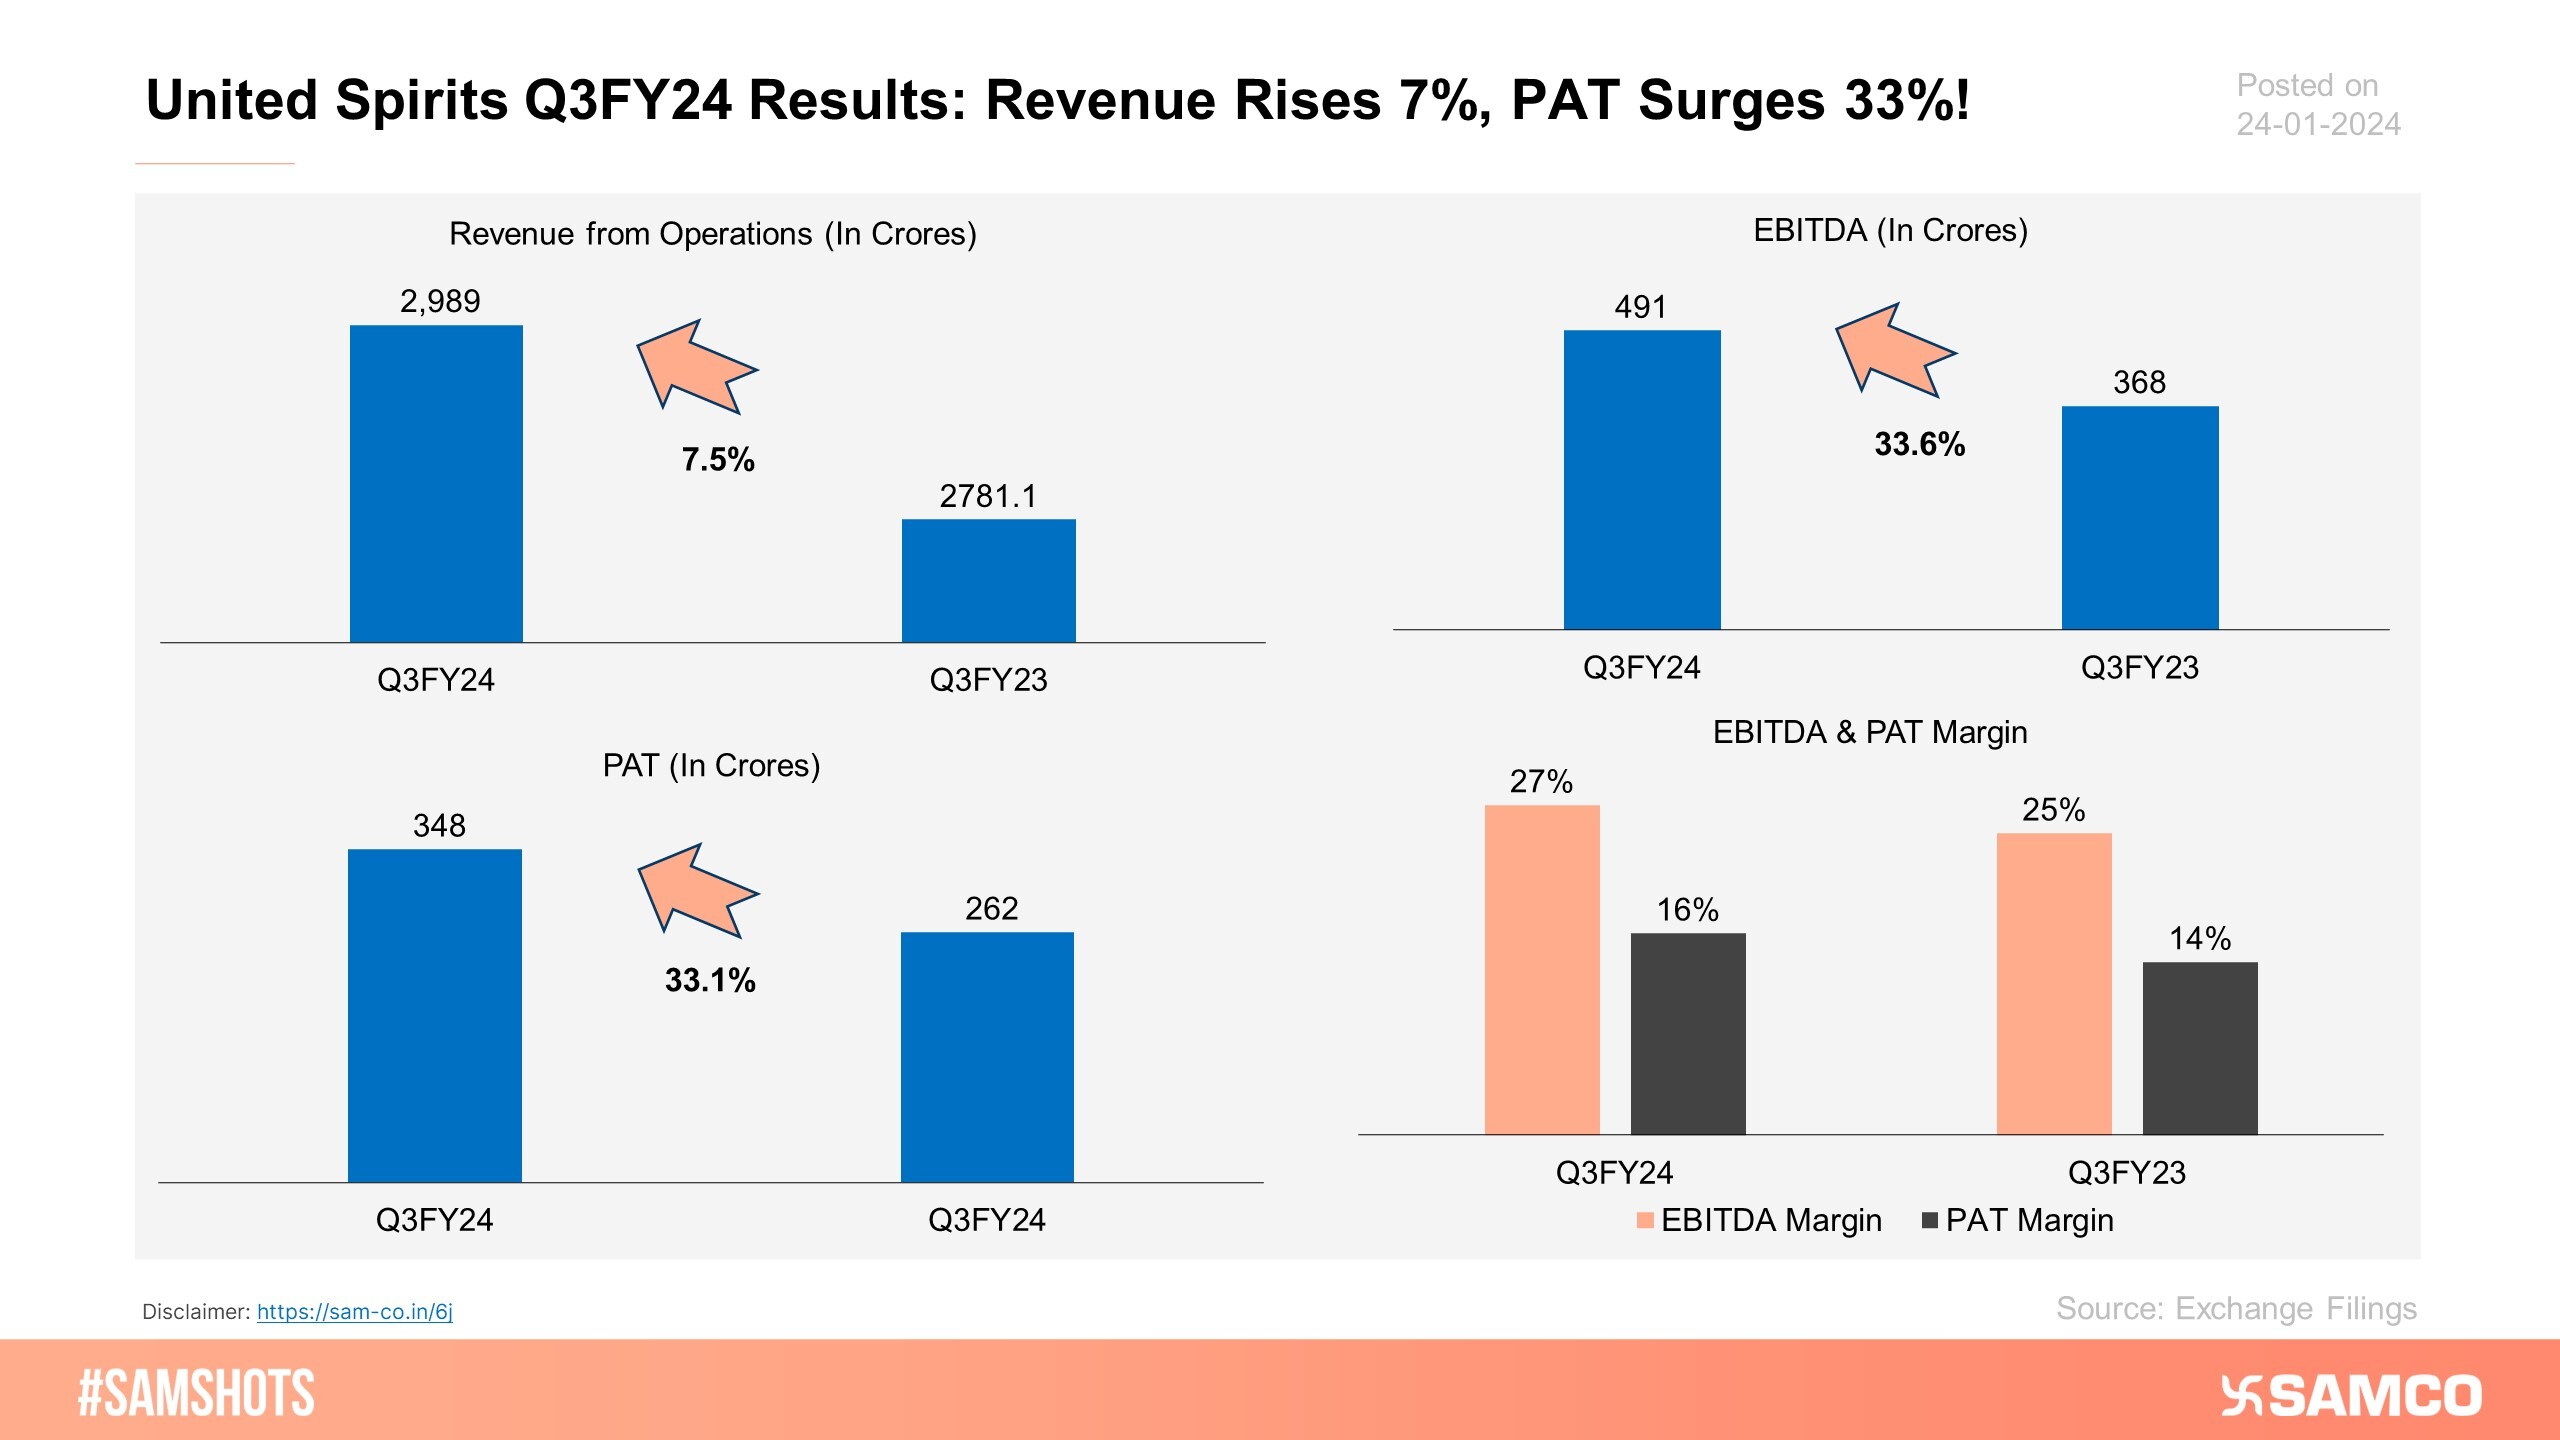 The chart represents the performance of United Spirits in Q3FY24.